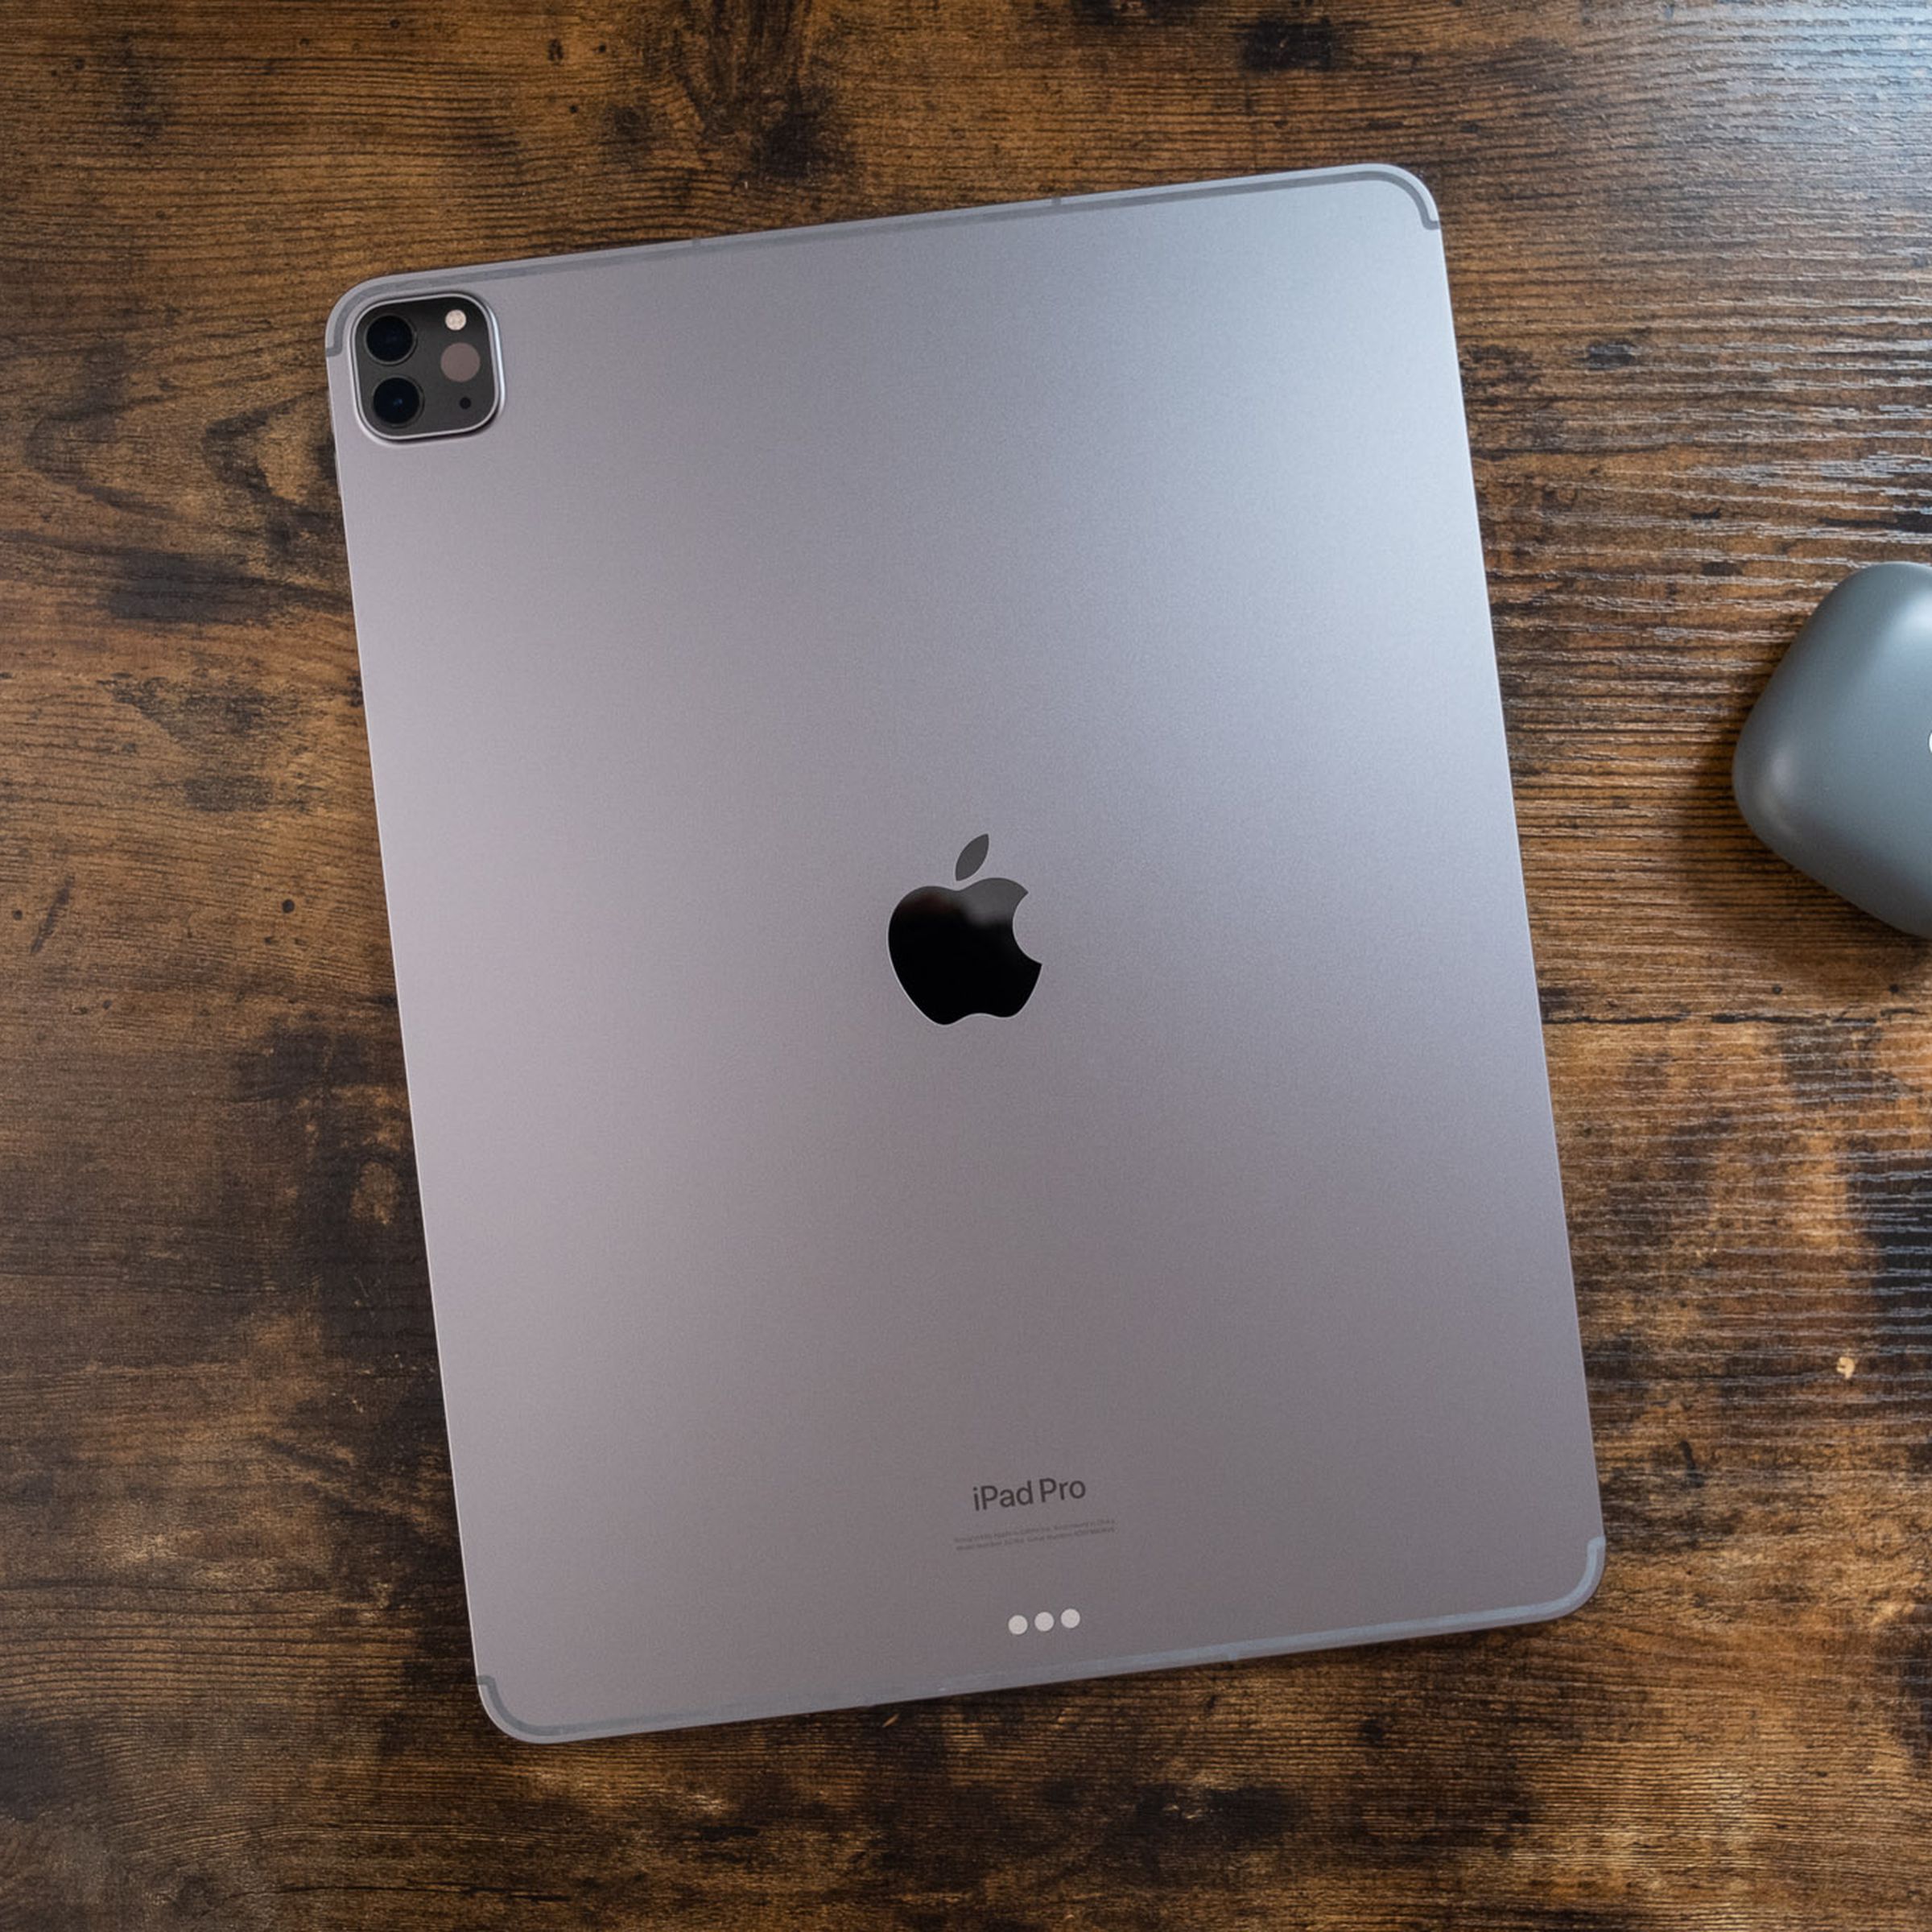 A space gray 12.9-inch iPad Pro face down on a wooden table, viewed from top to bottom.